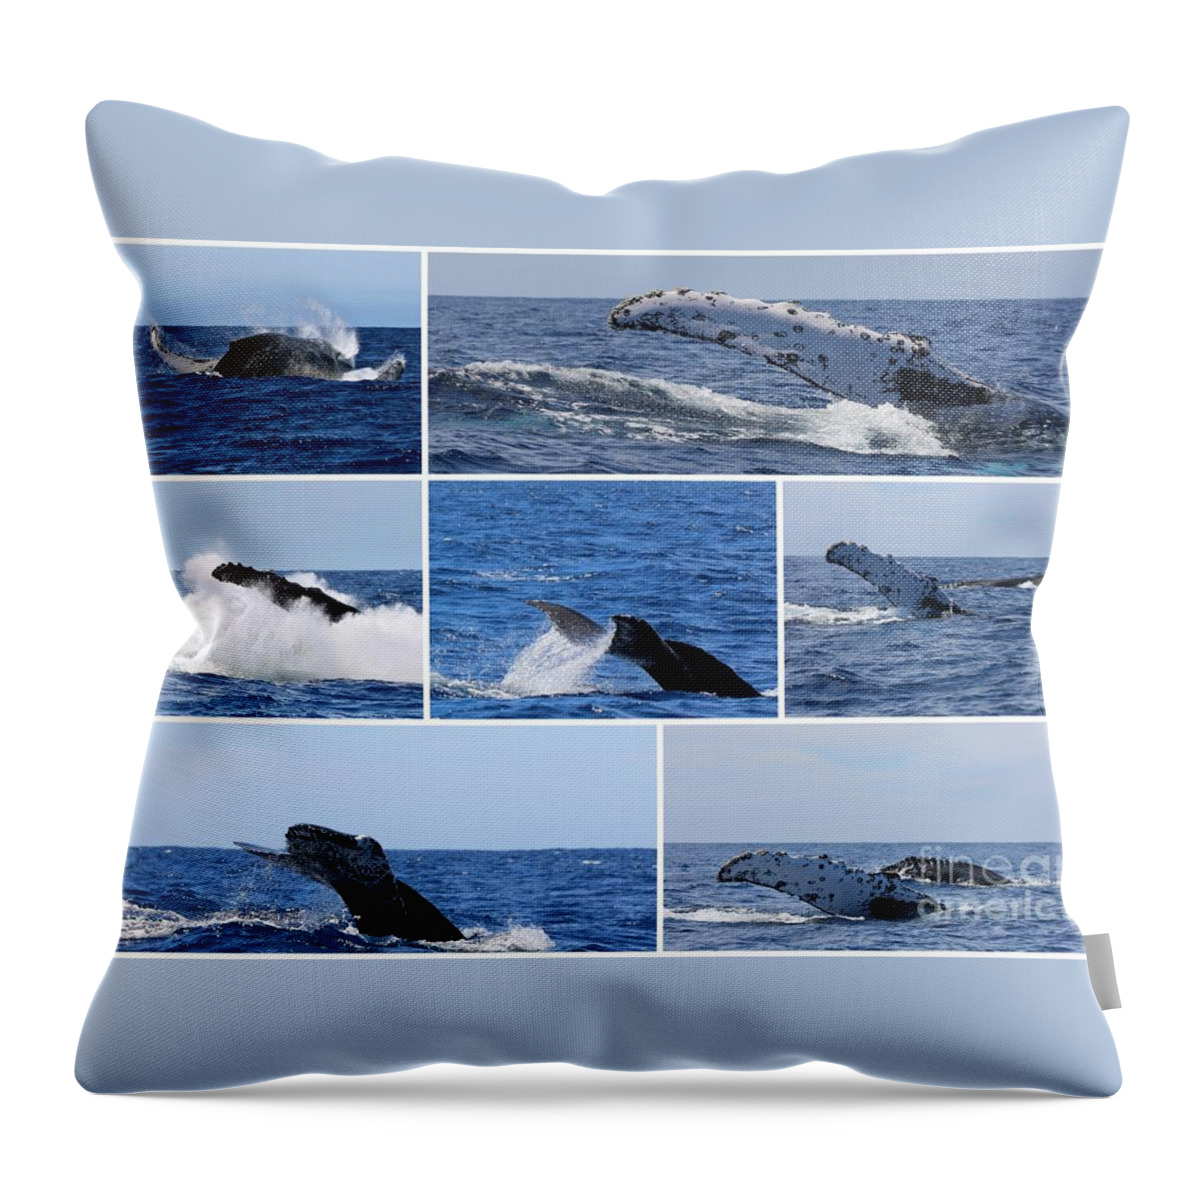 Seascape Throw Pillow featuring the photograph Whale Action by Sheila Ping